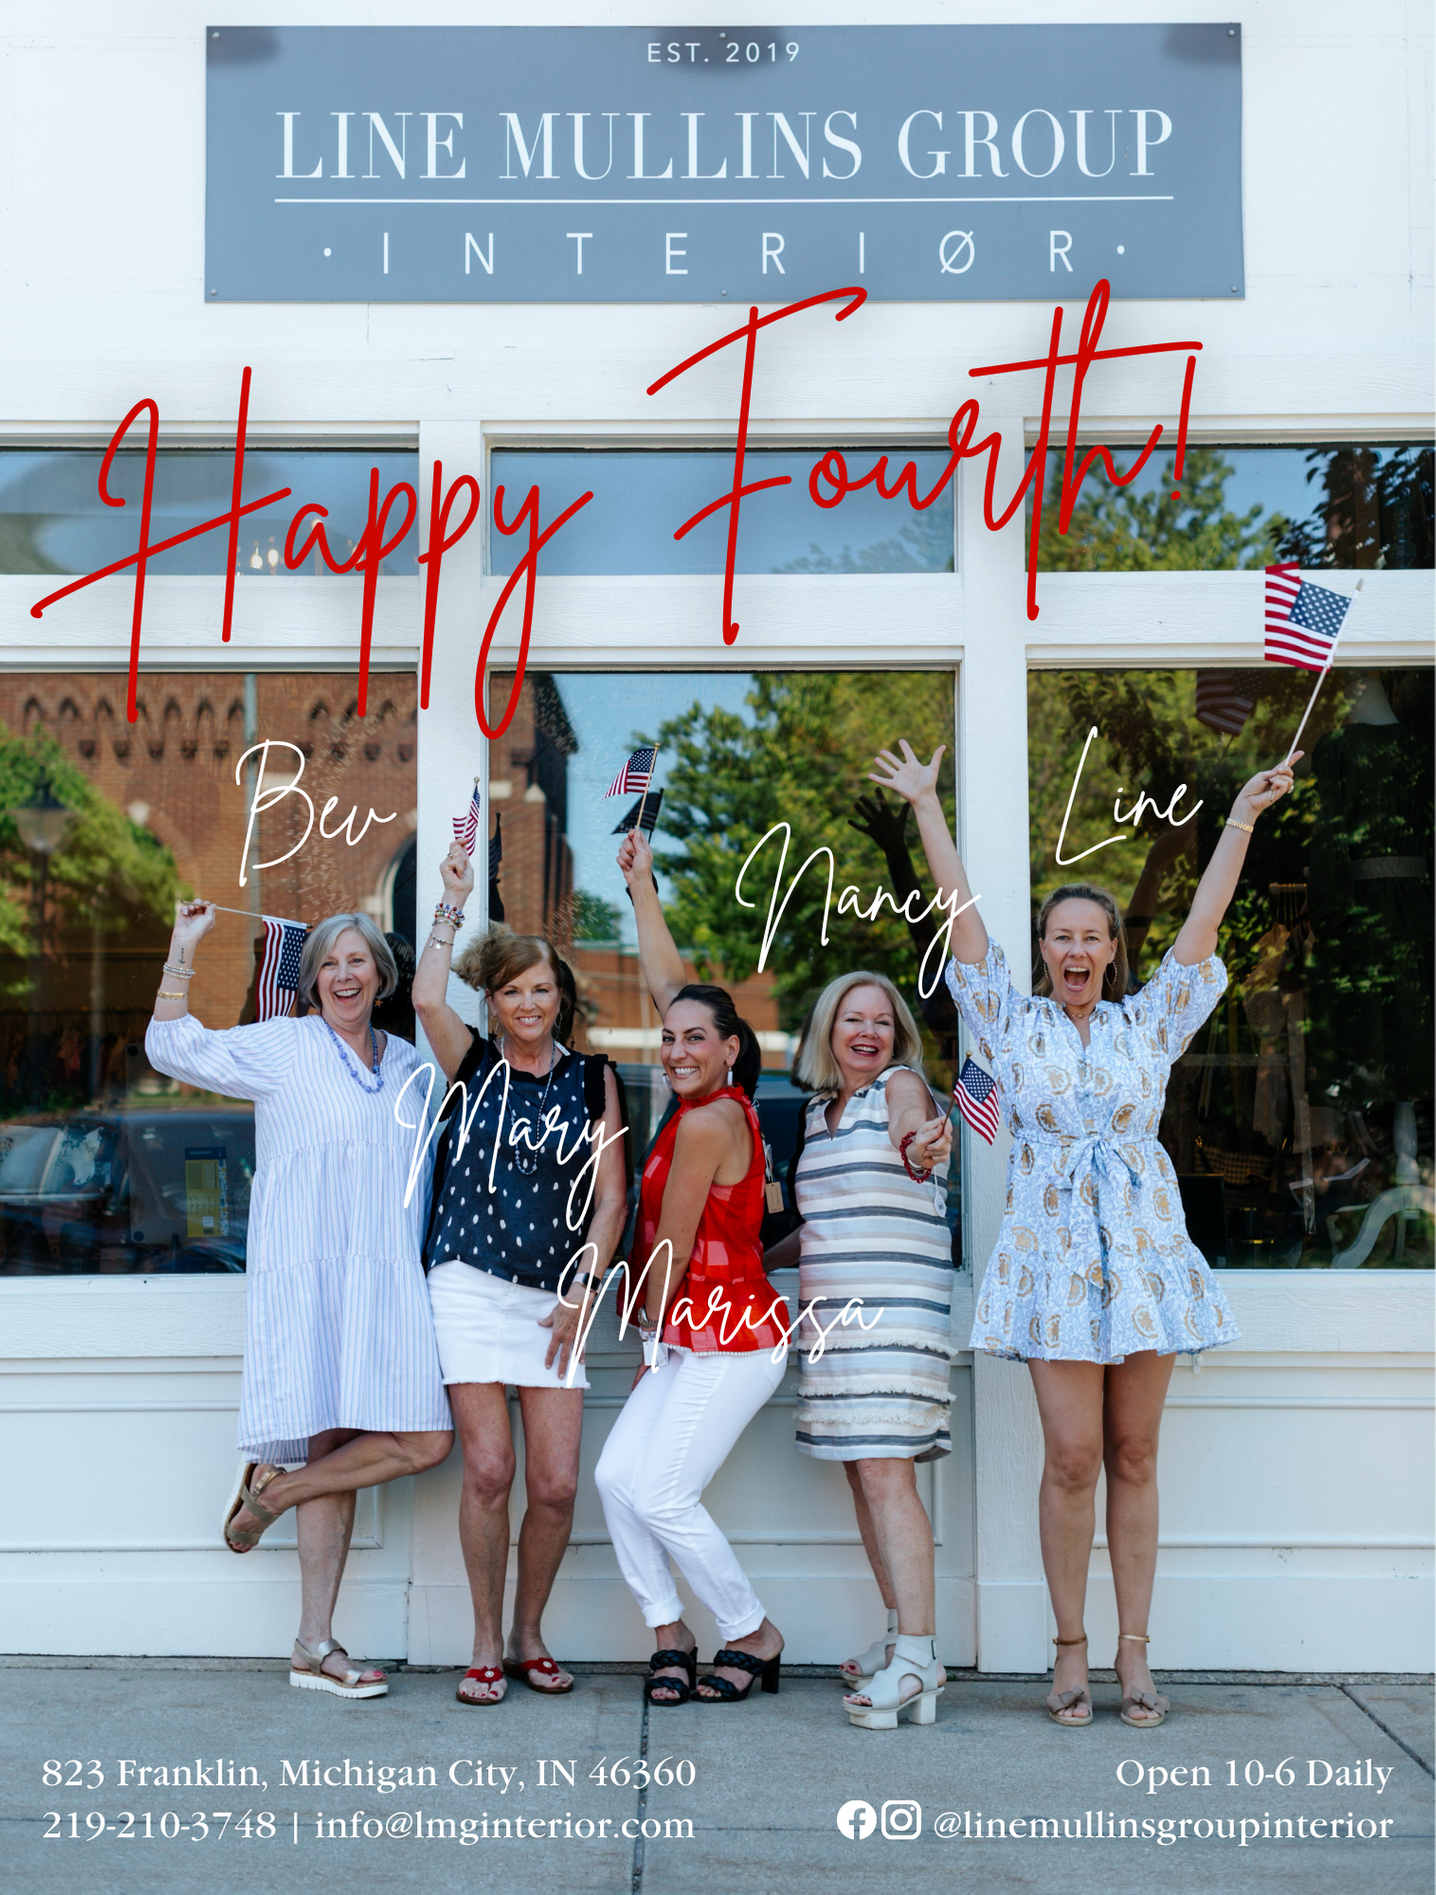 Happy Fourth of July from Bev, Mary, Marissa, Nancy, and Line!